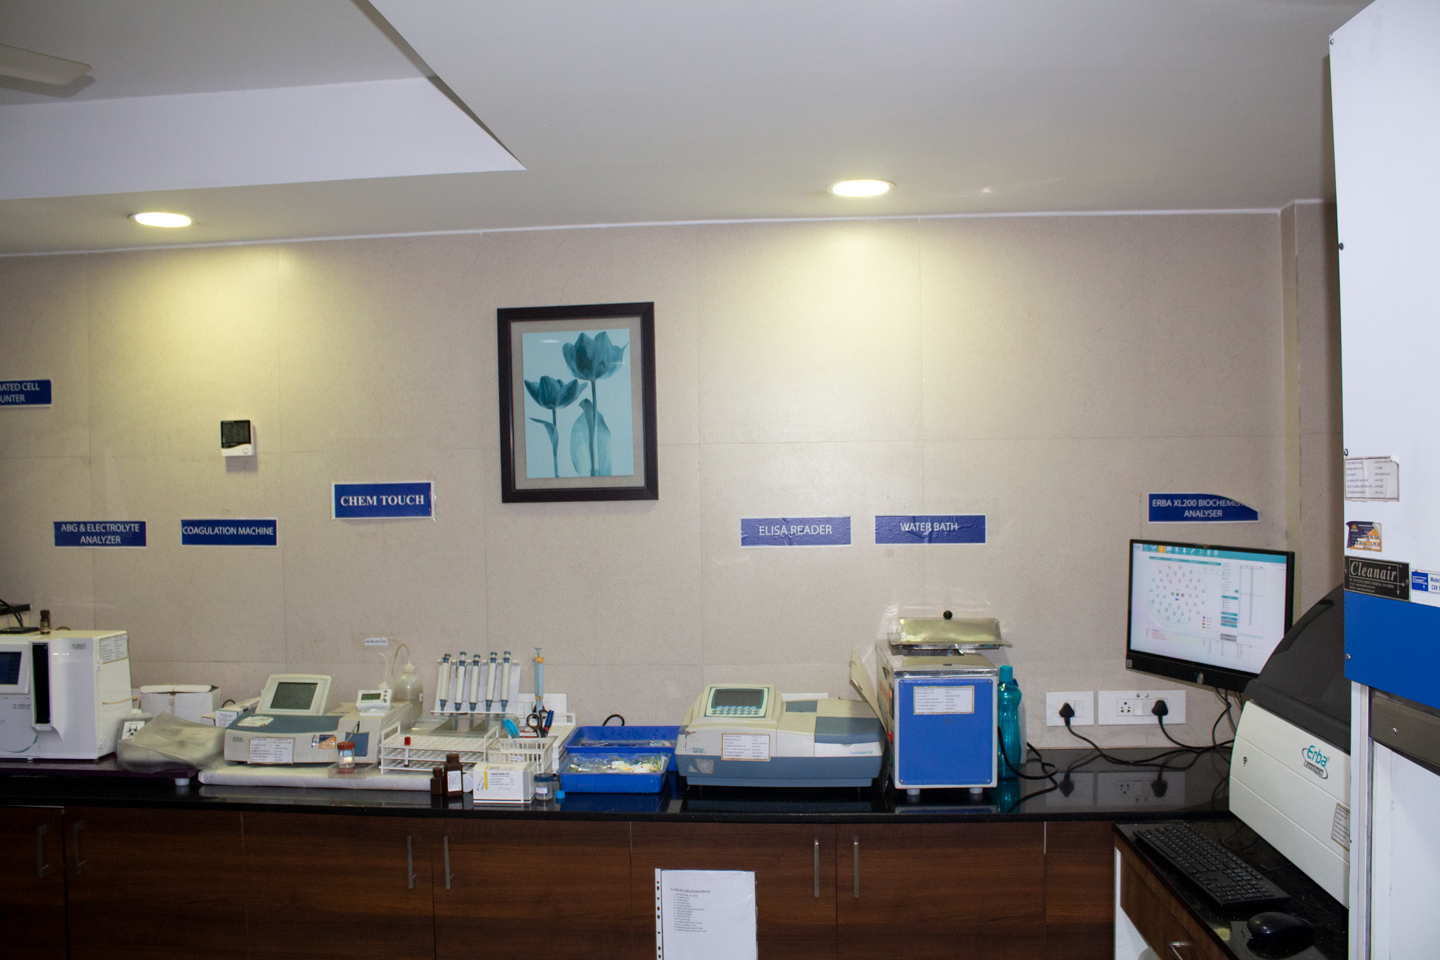 A view of the lab infrastructure at Sri Balaji Hospital, Chennai.